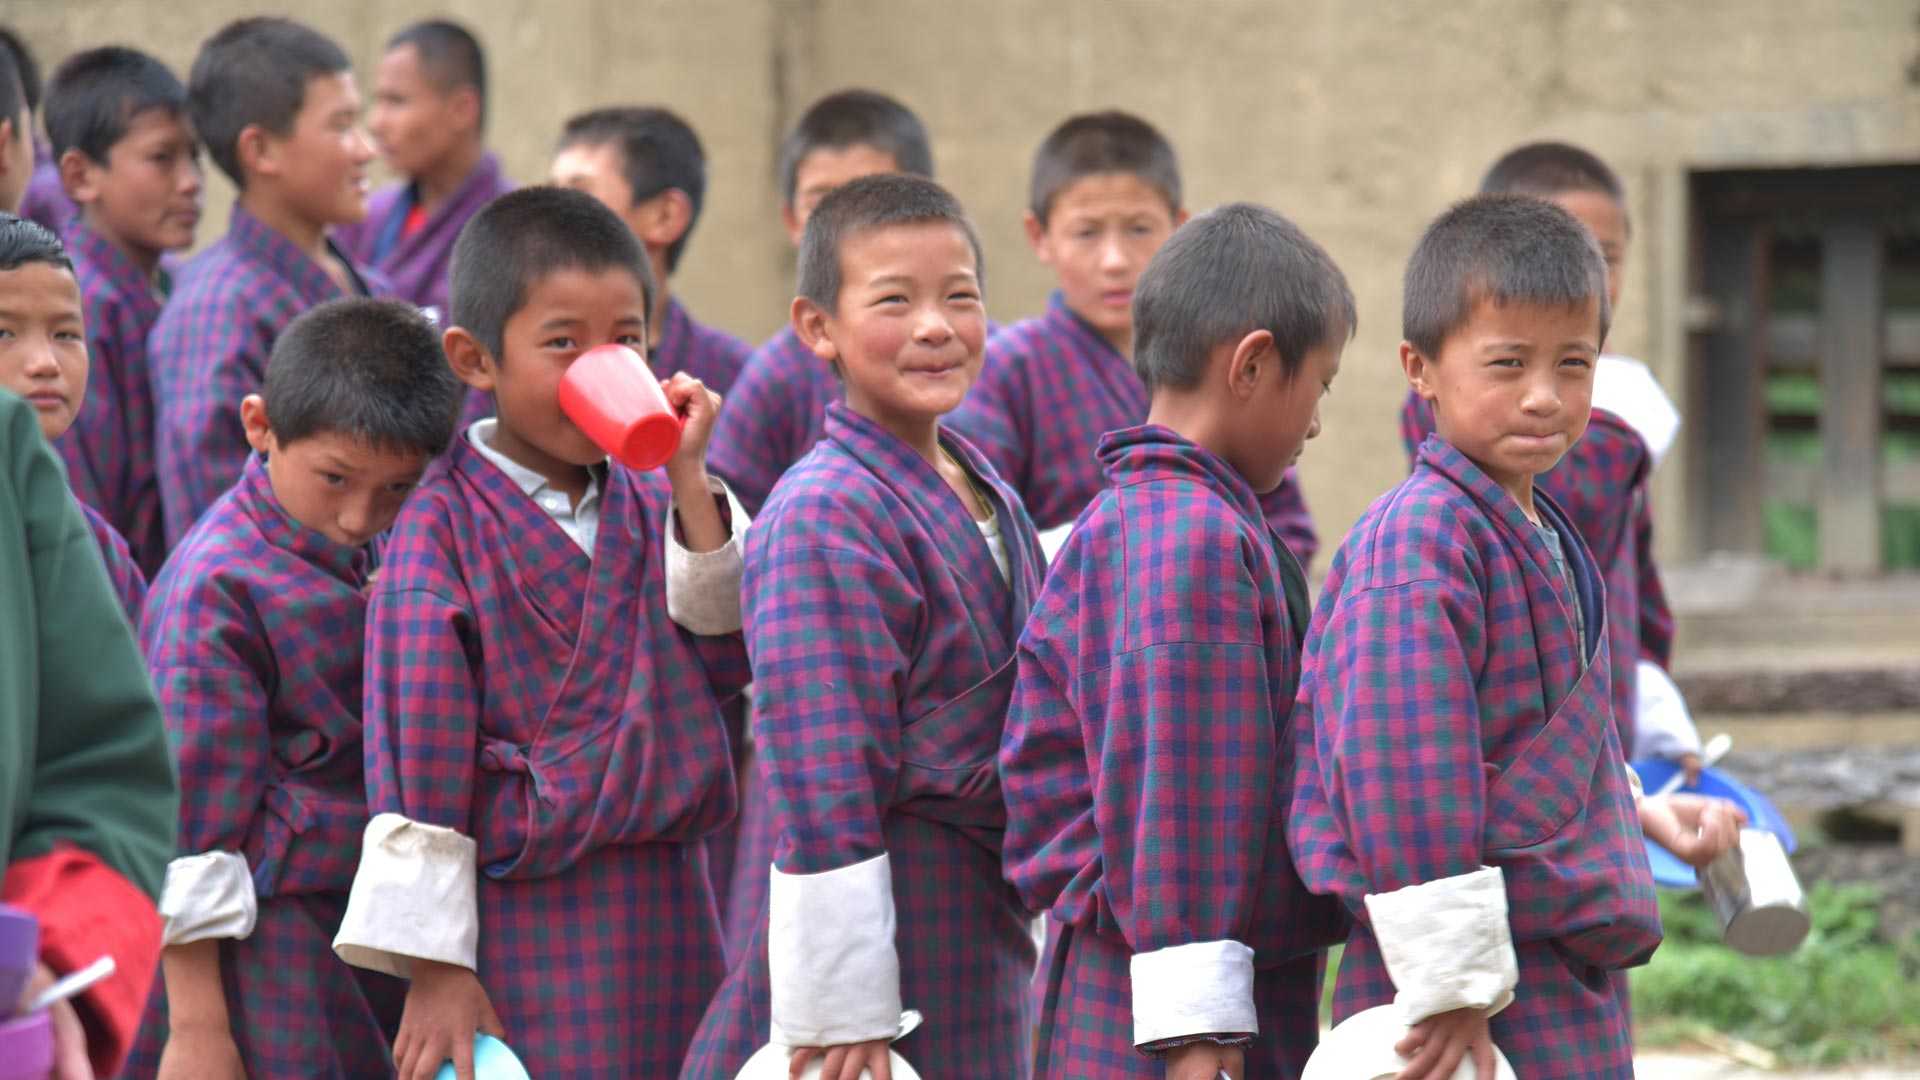 Pupils from Bhutan queuing for meal 